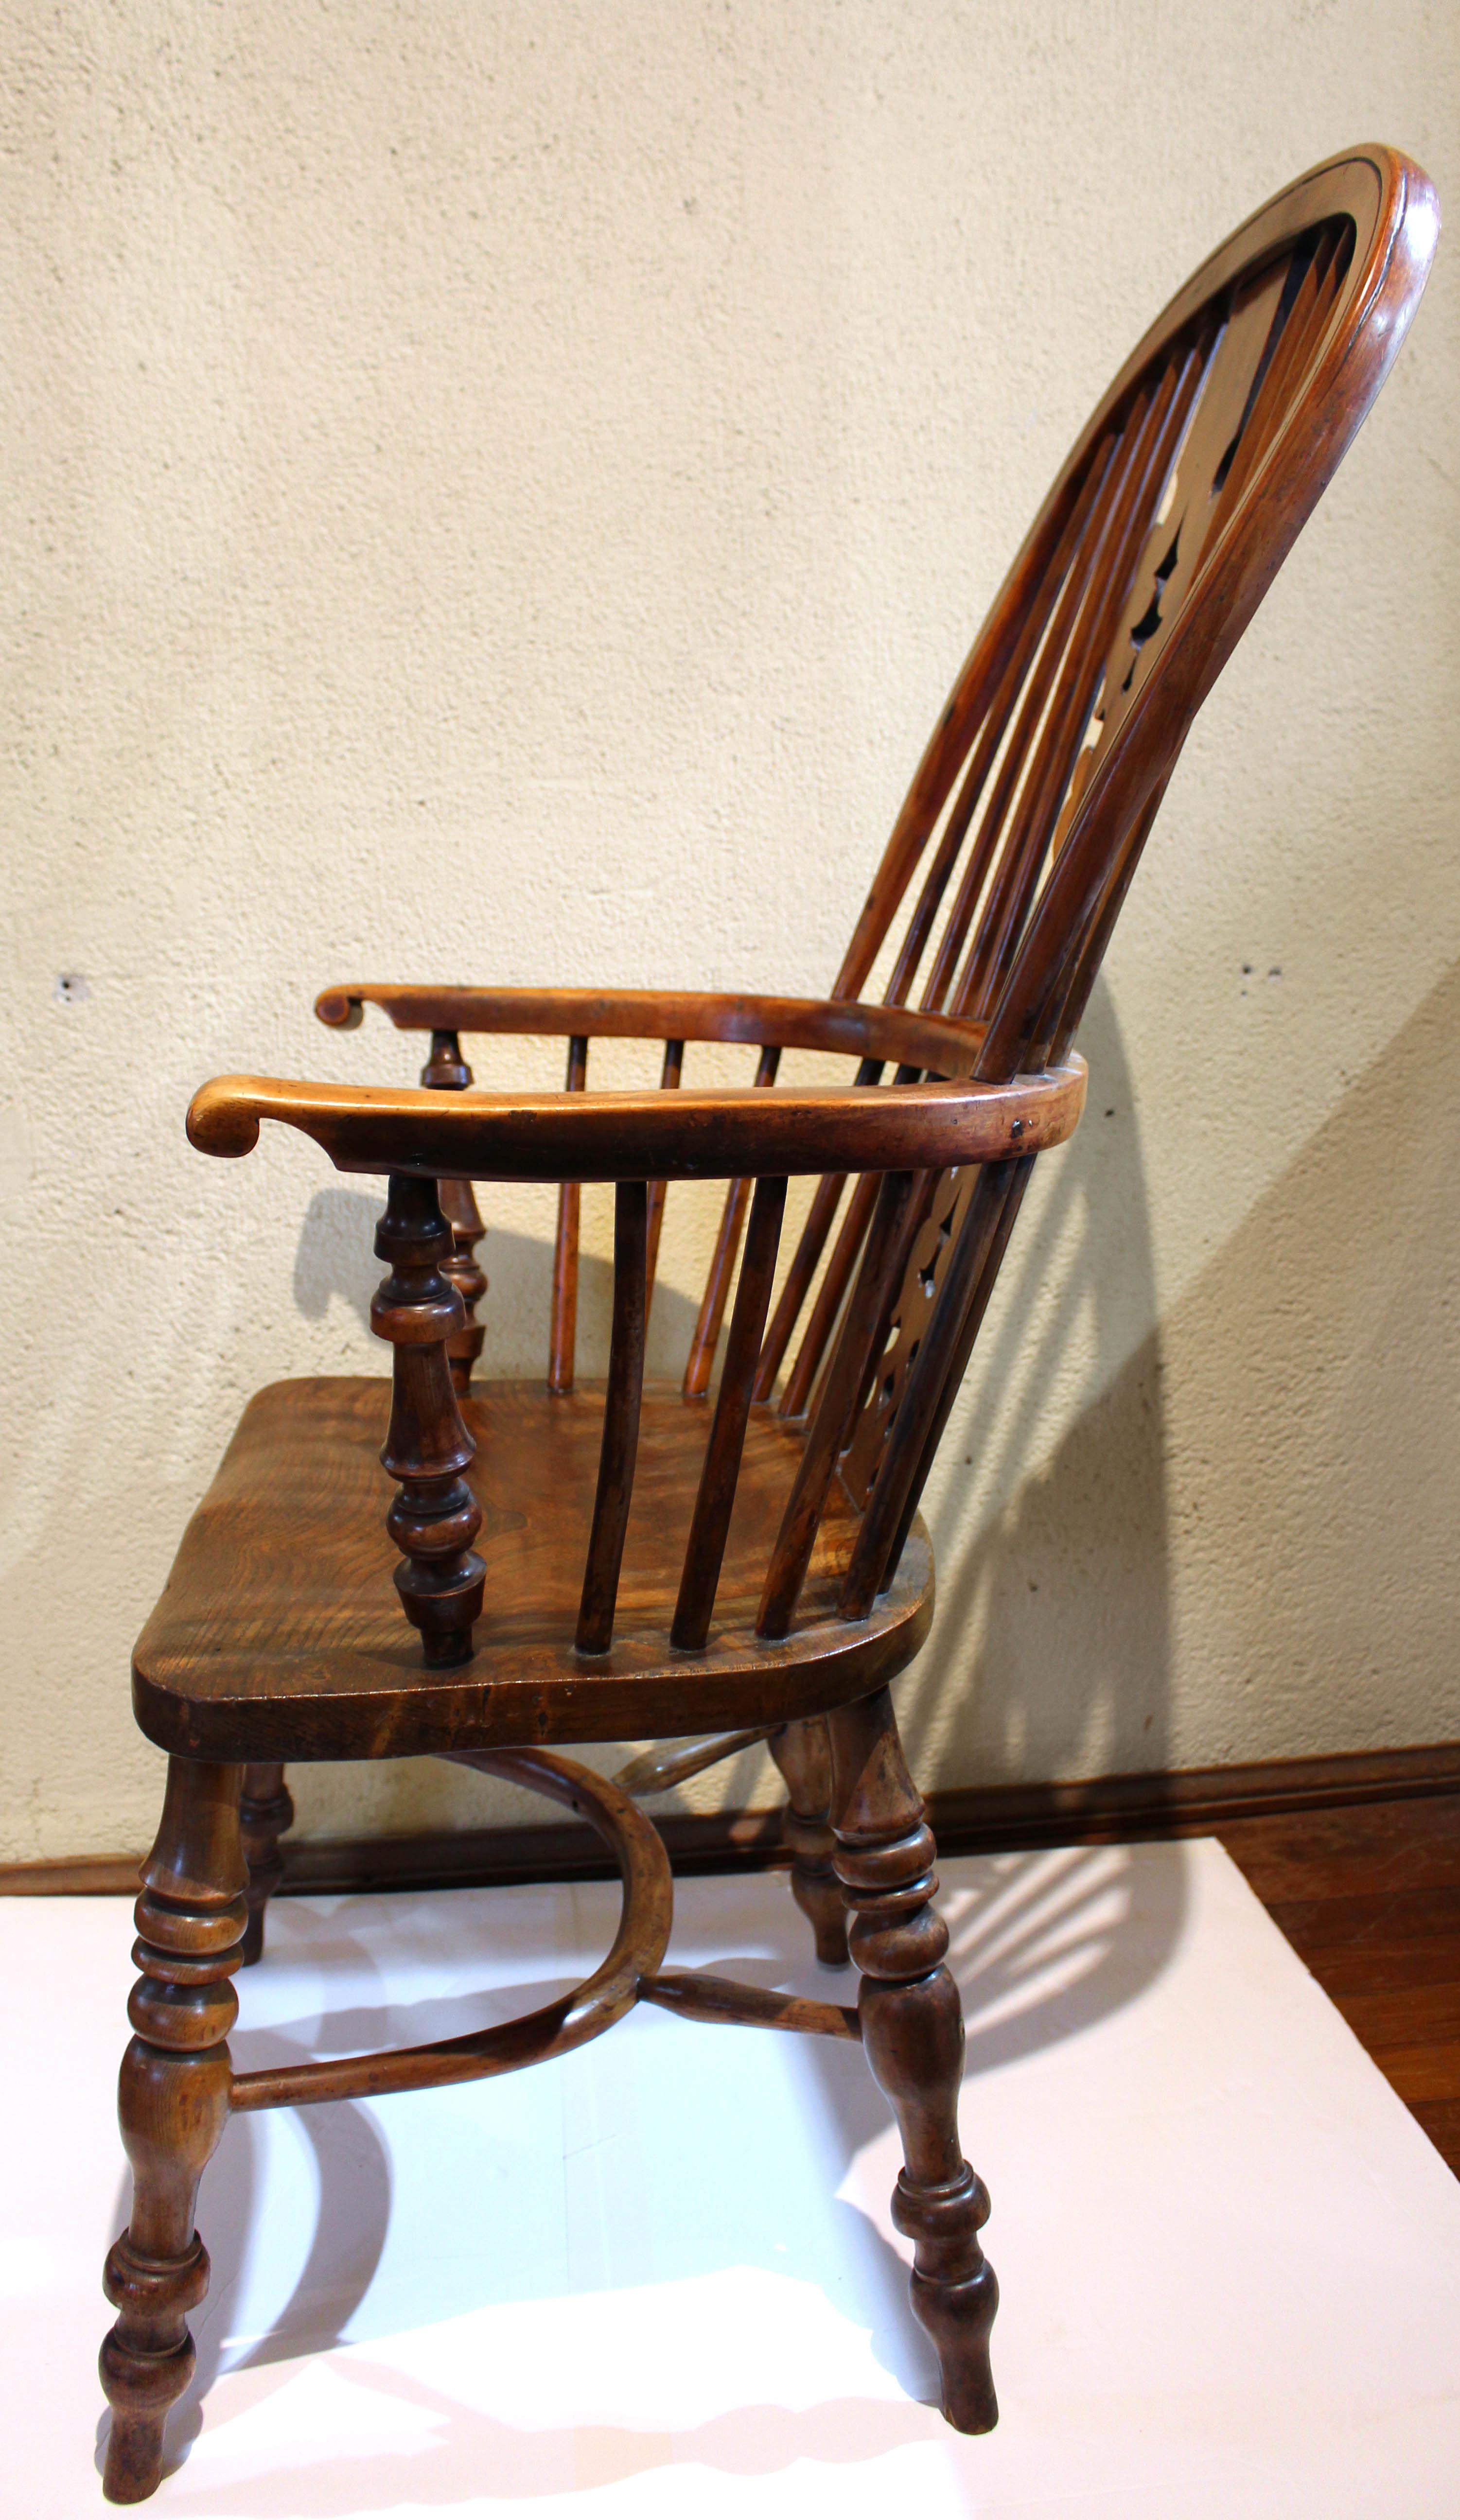 Circa 1830 English high back Windsor arm chair, yew wood. This sturdy, comfortable chair has desired 